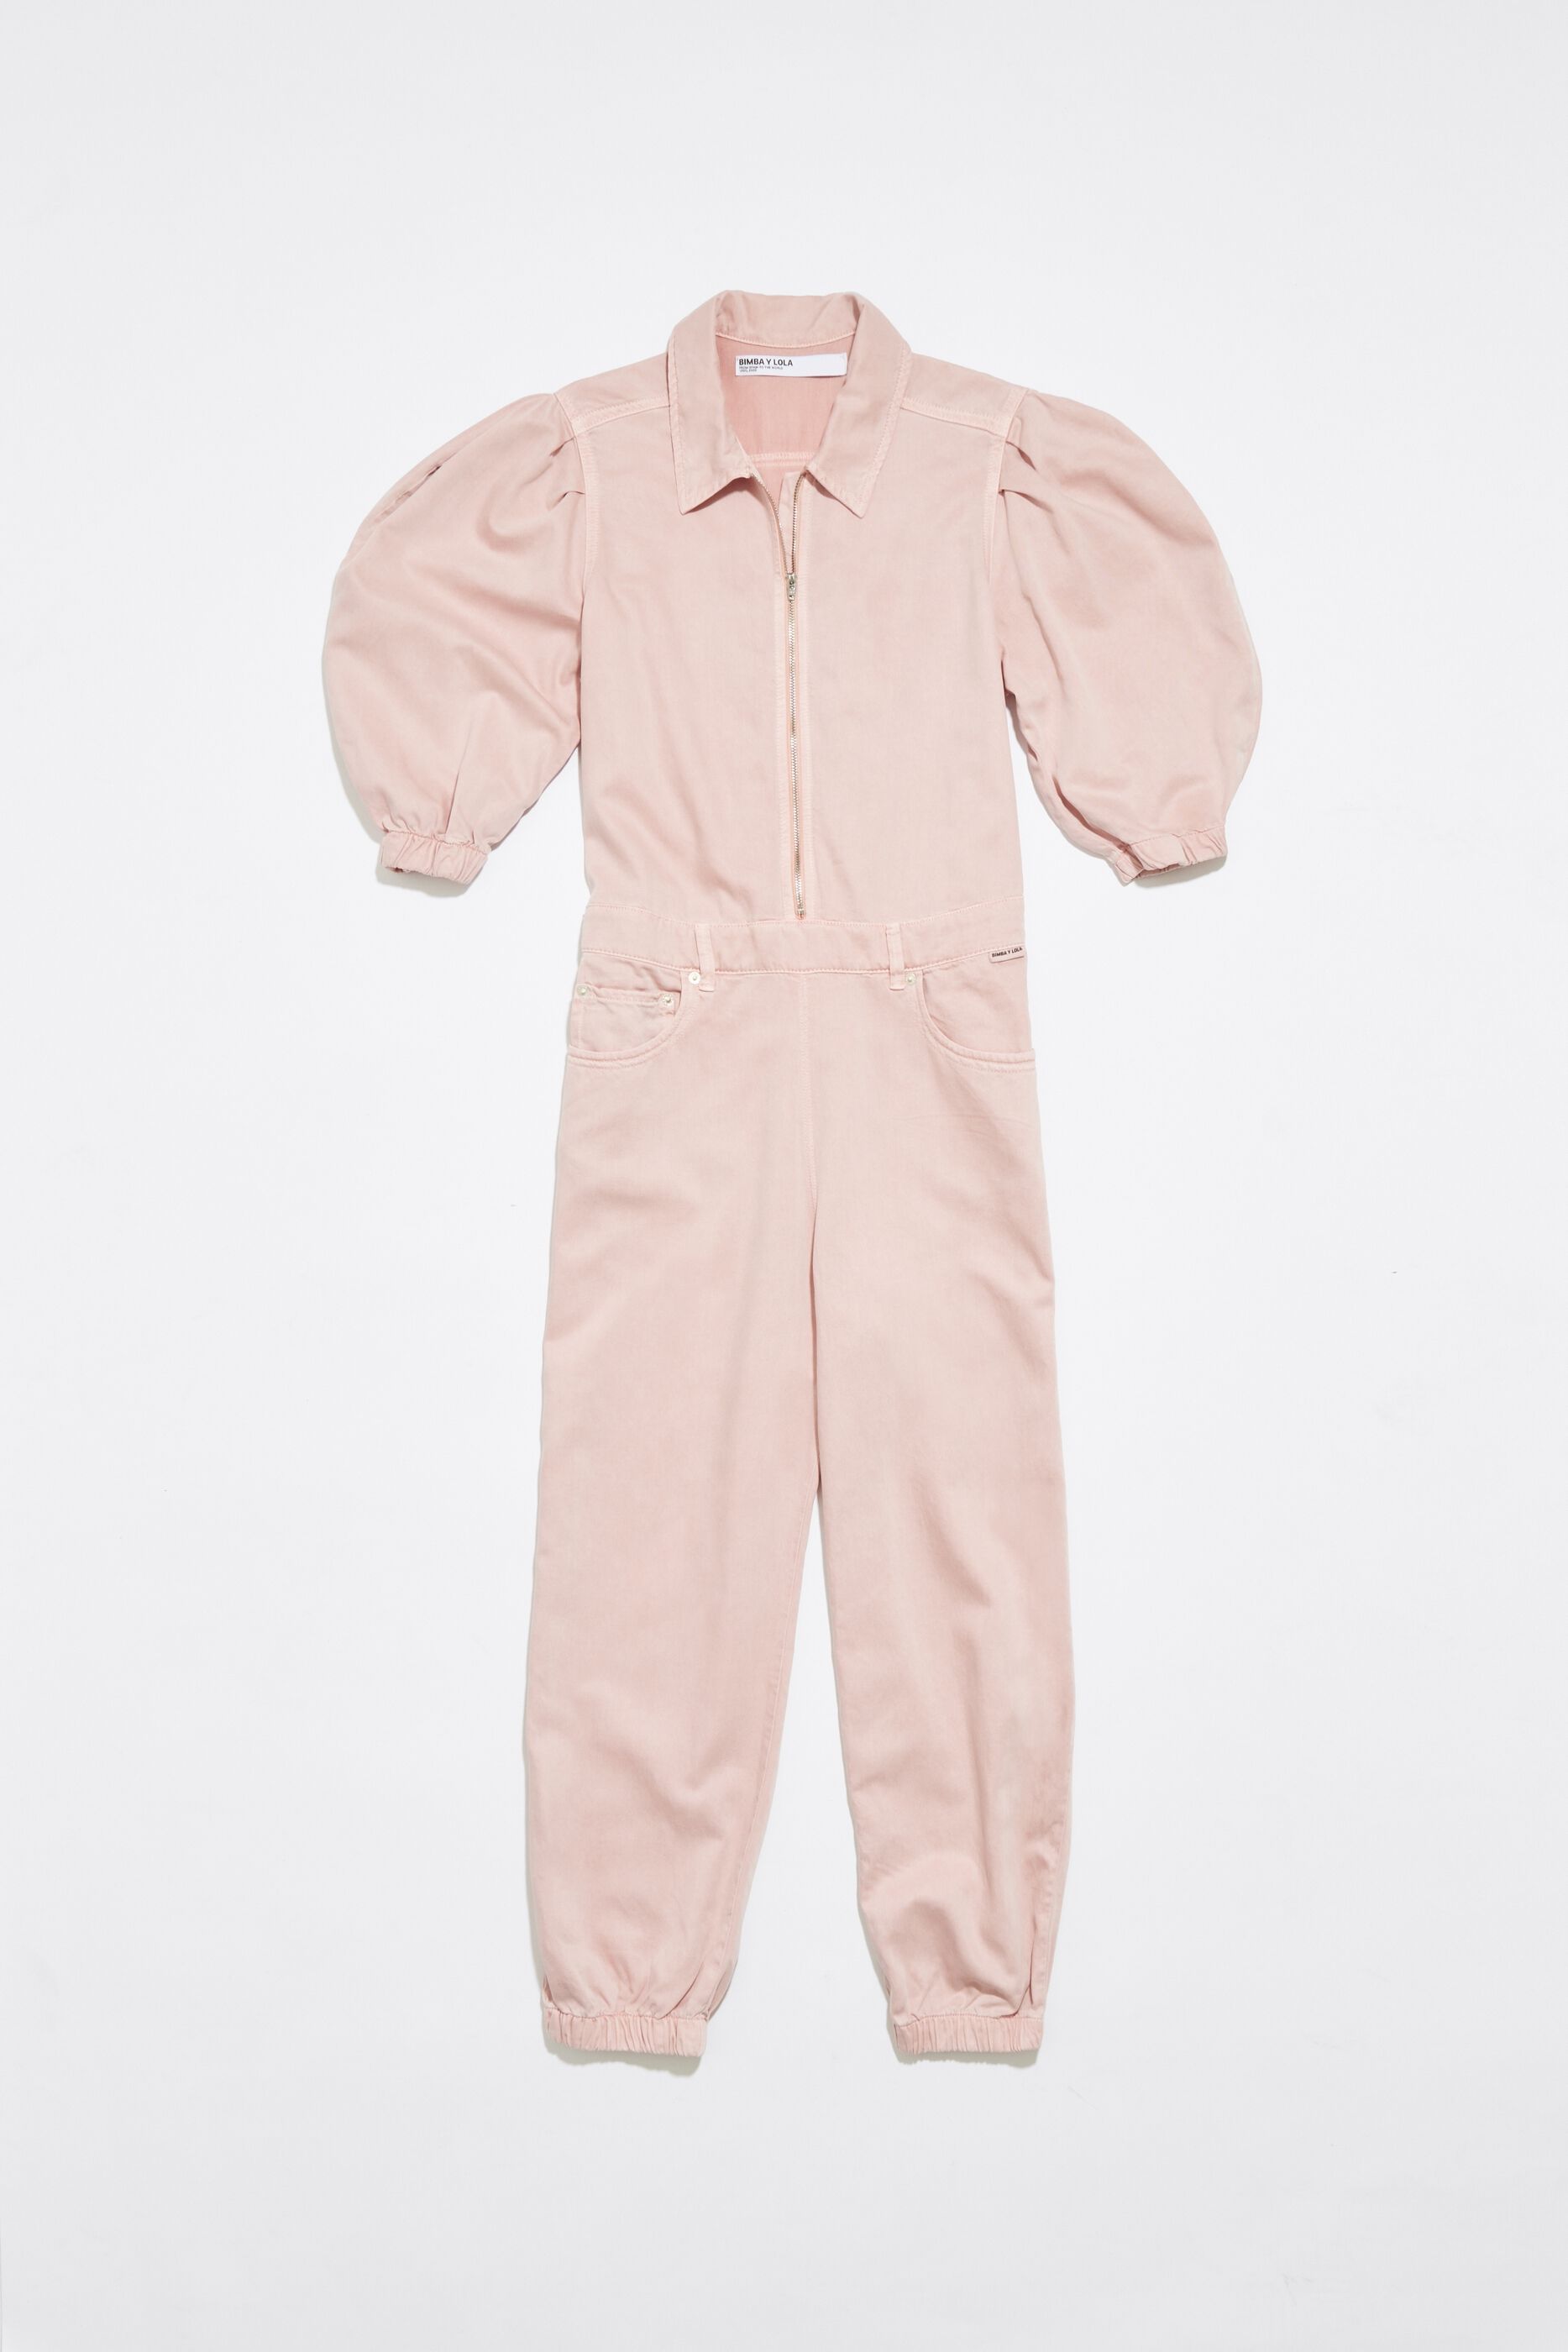 Jumpsuits & Co-ords | Baby Pink Coloured Denim Jumpsuit | Freeup